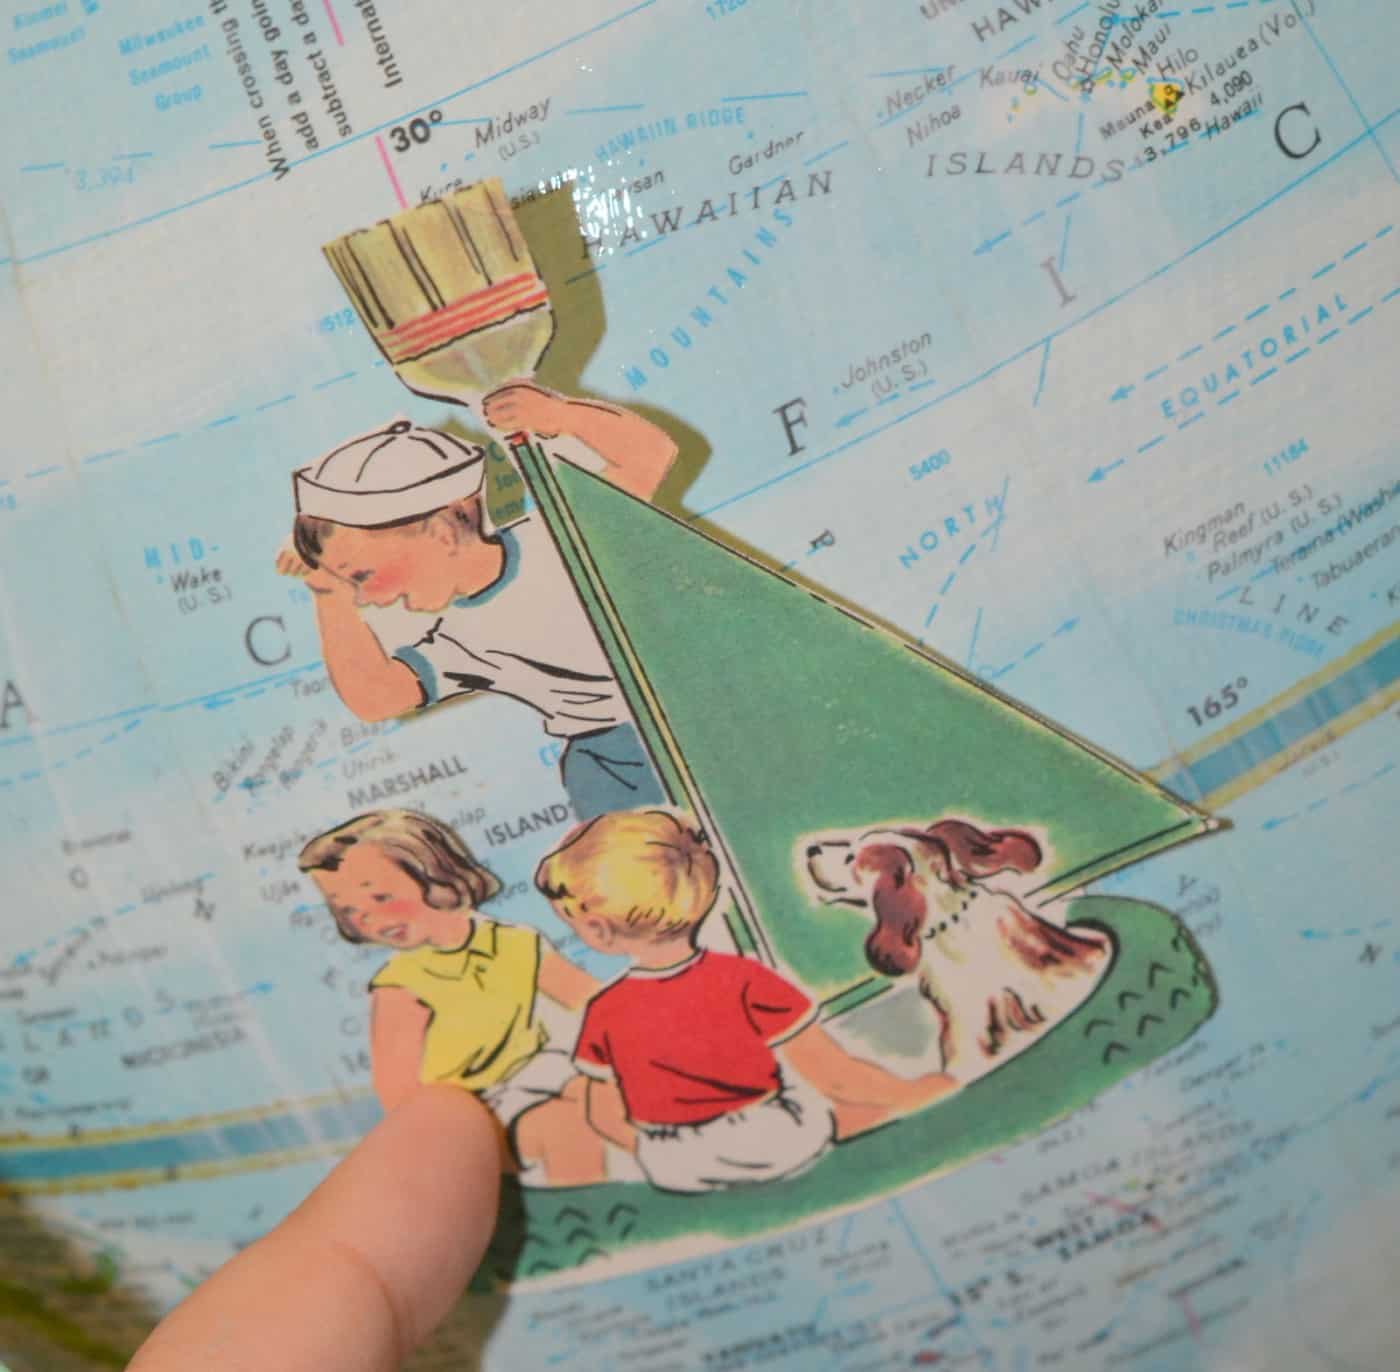 Graphic of kids in a boat being applied to the side of the globe with Mod Podge